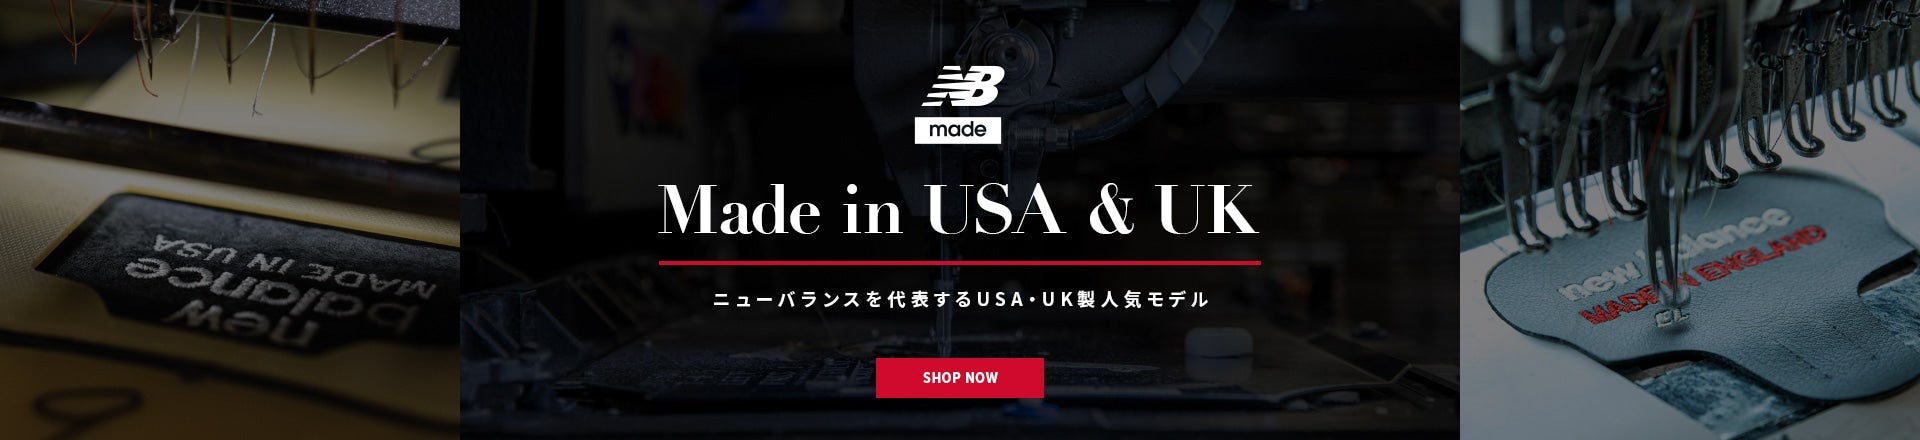 Made in USA/UK